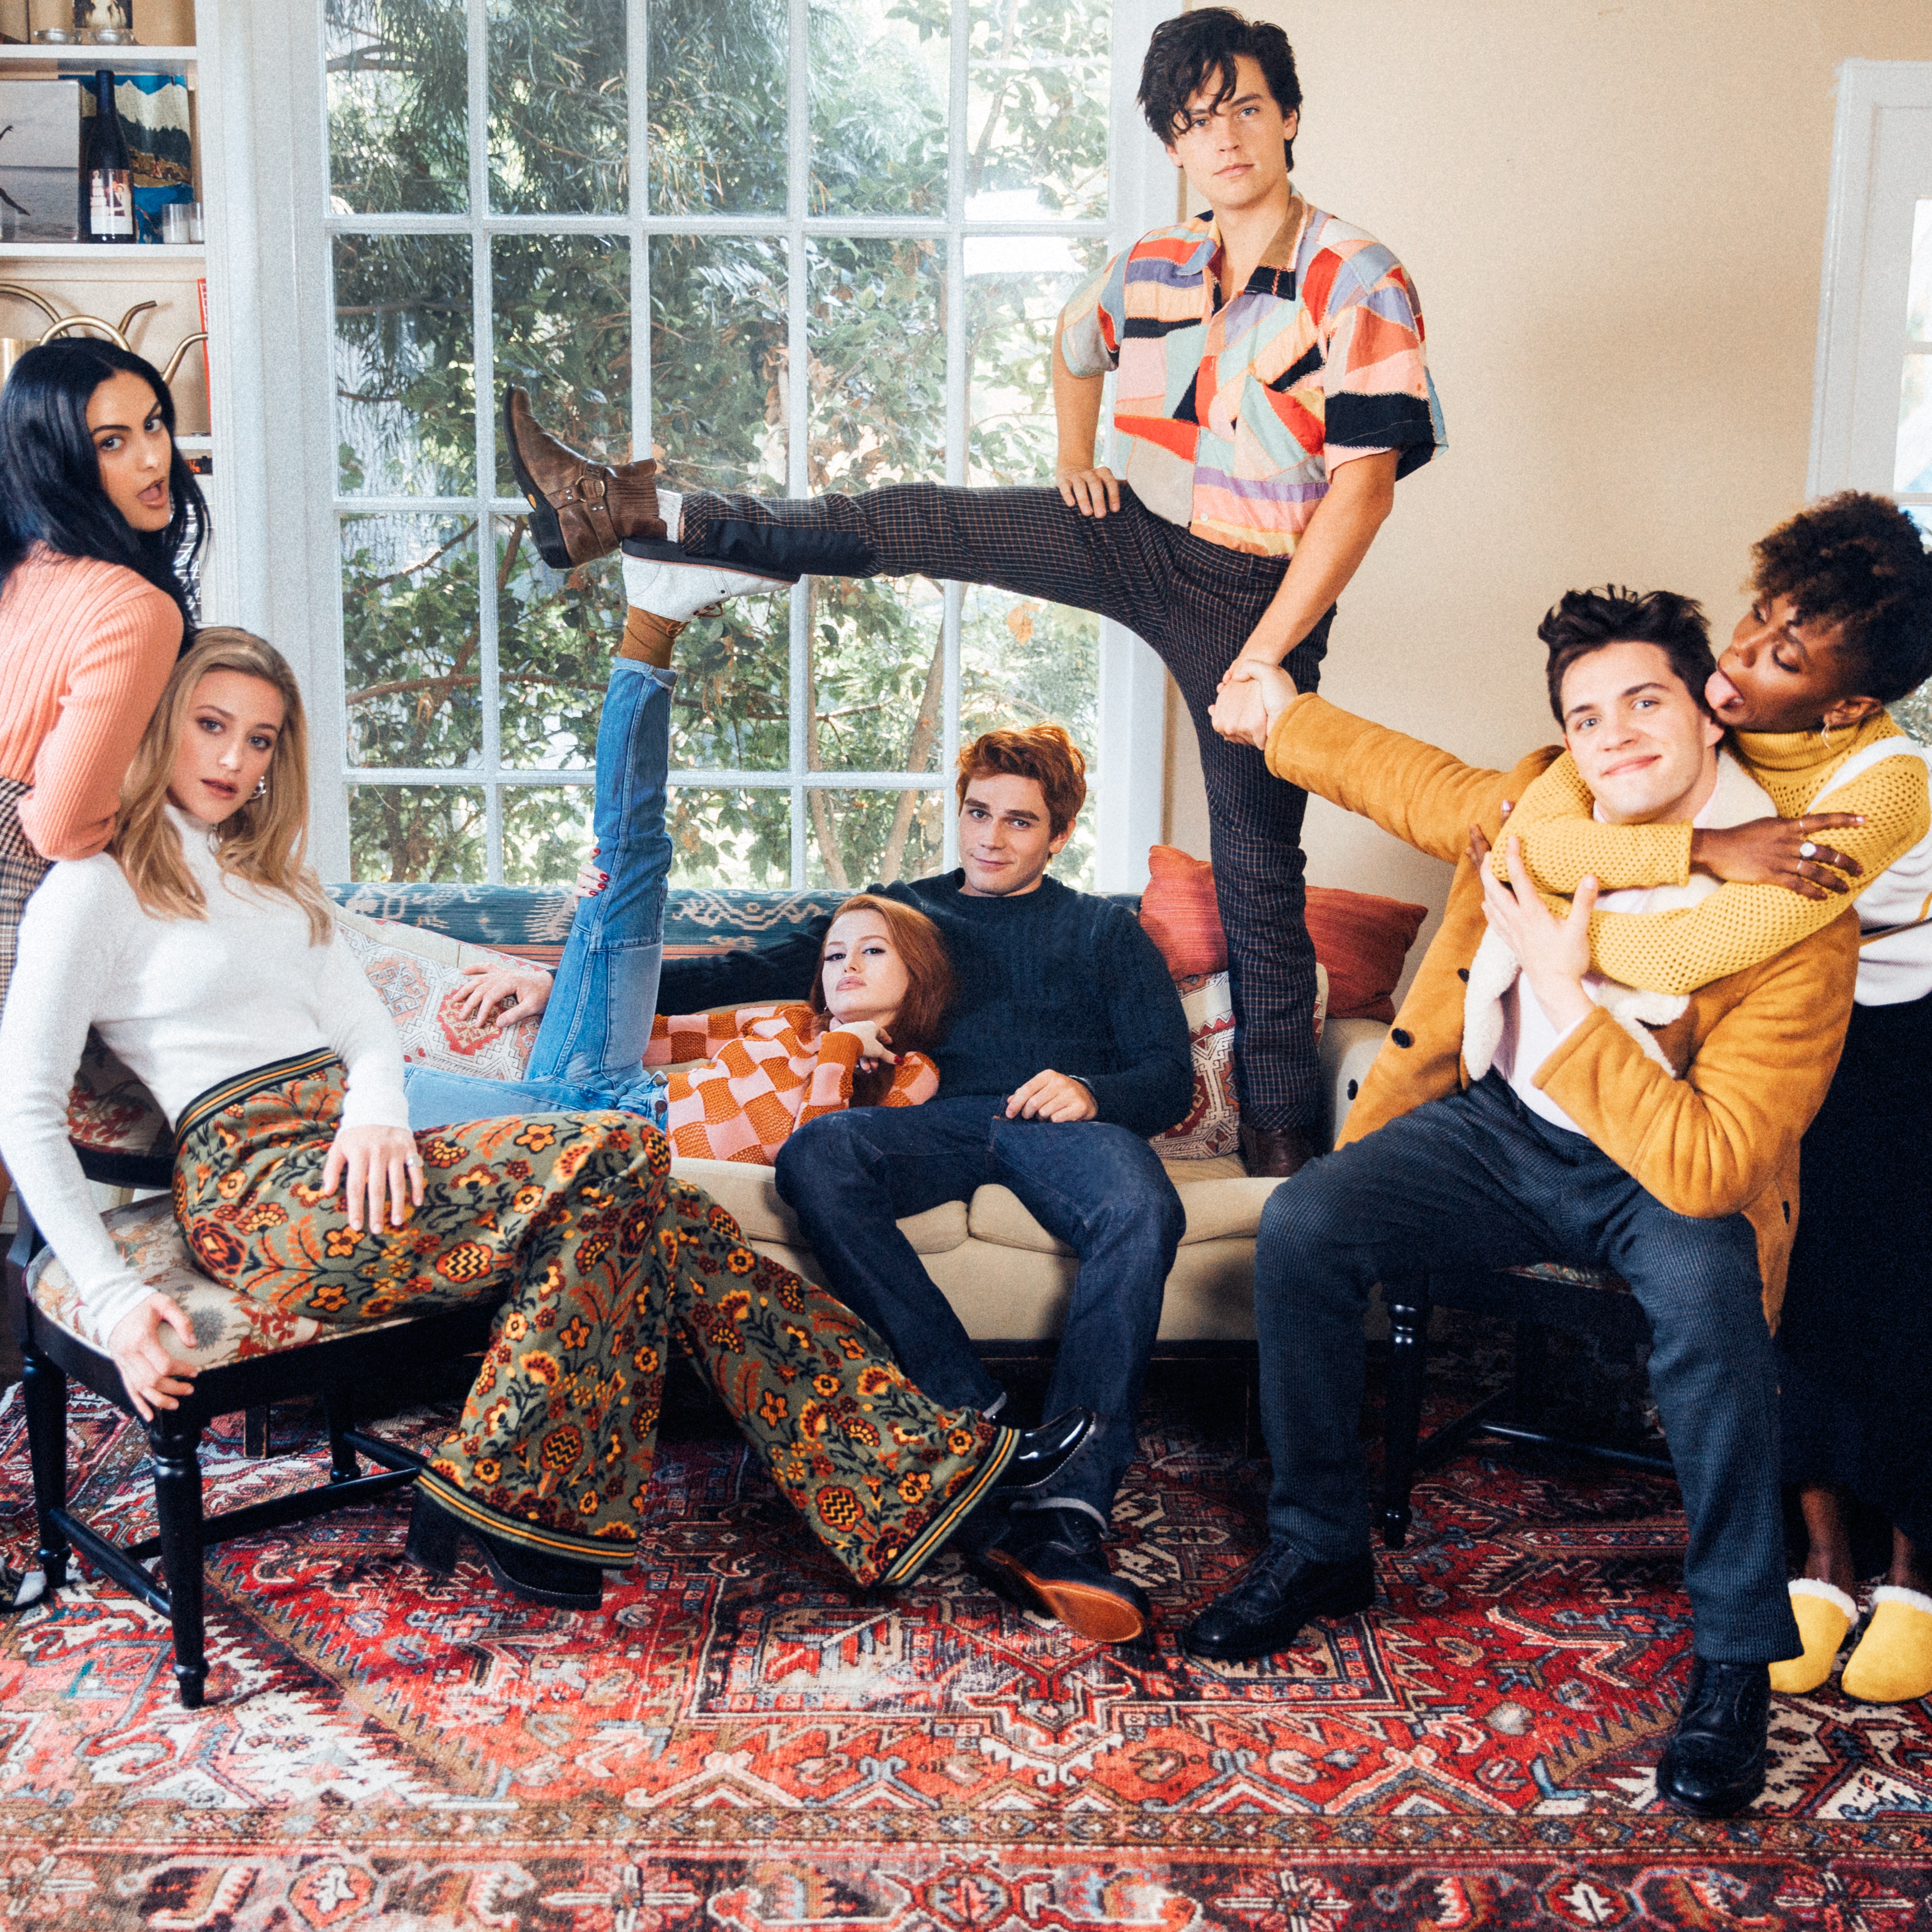 Riverdale Stars Talk Season 2 Spoilers in This Exclusive Photo Shoot